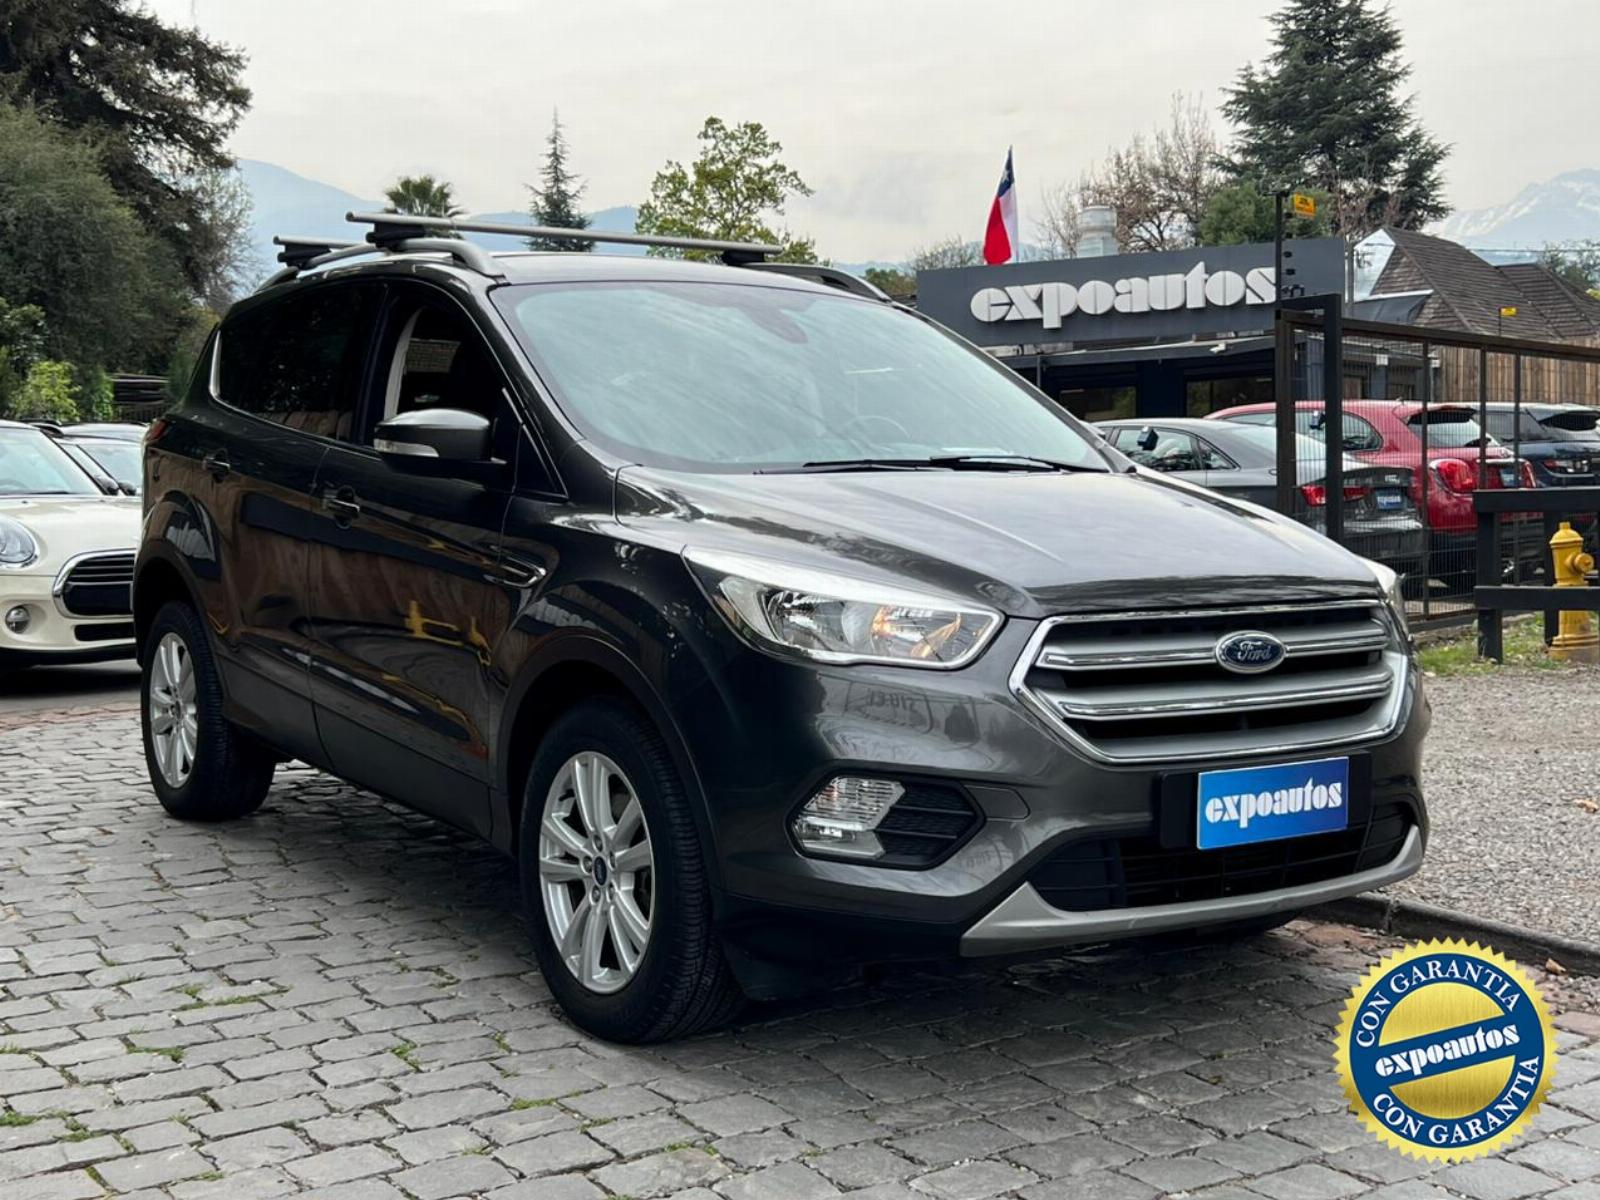 FORD ESCAPE ECOBOOST 2019 2.0 TURBO 6 F35 250 HP - ExpoAutos